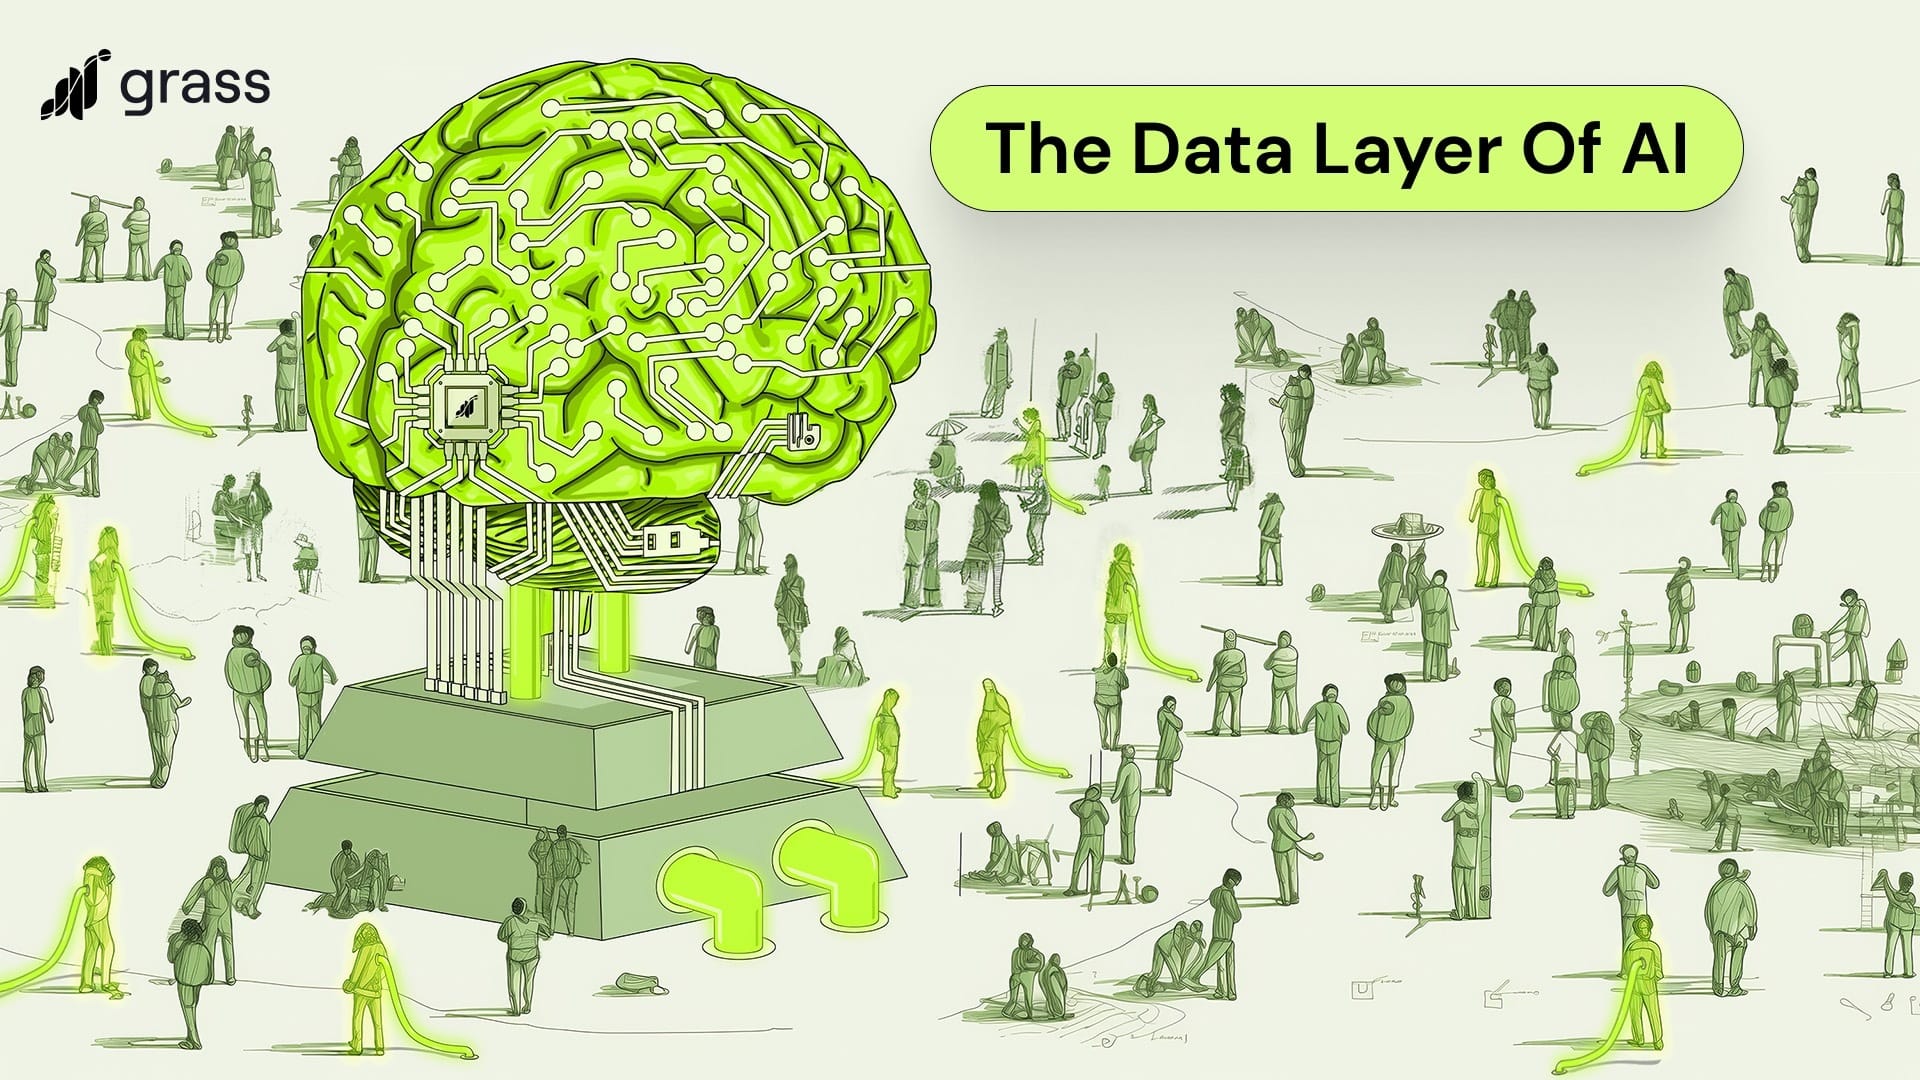 Grass is the Data Layer of AI